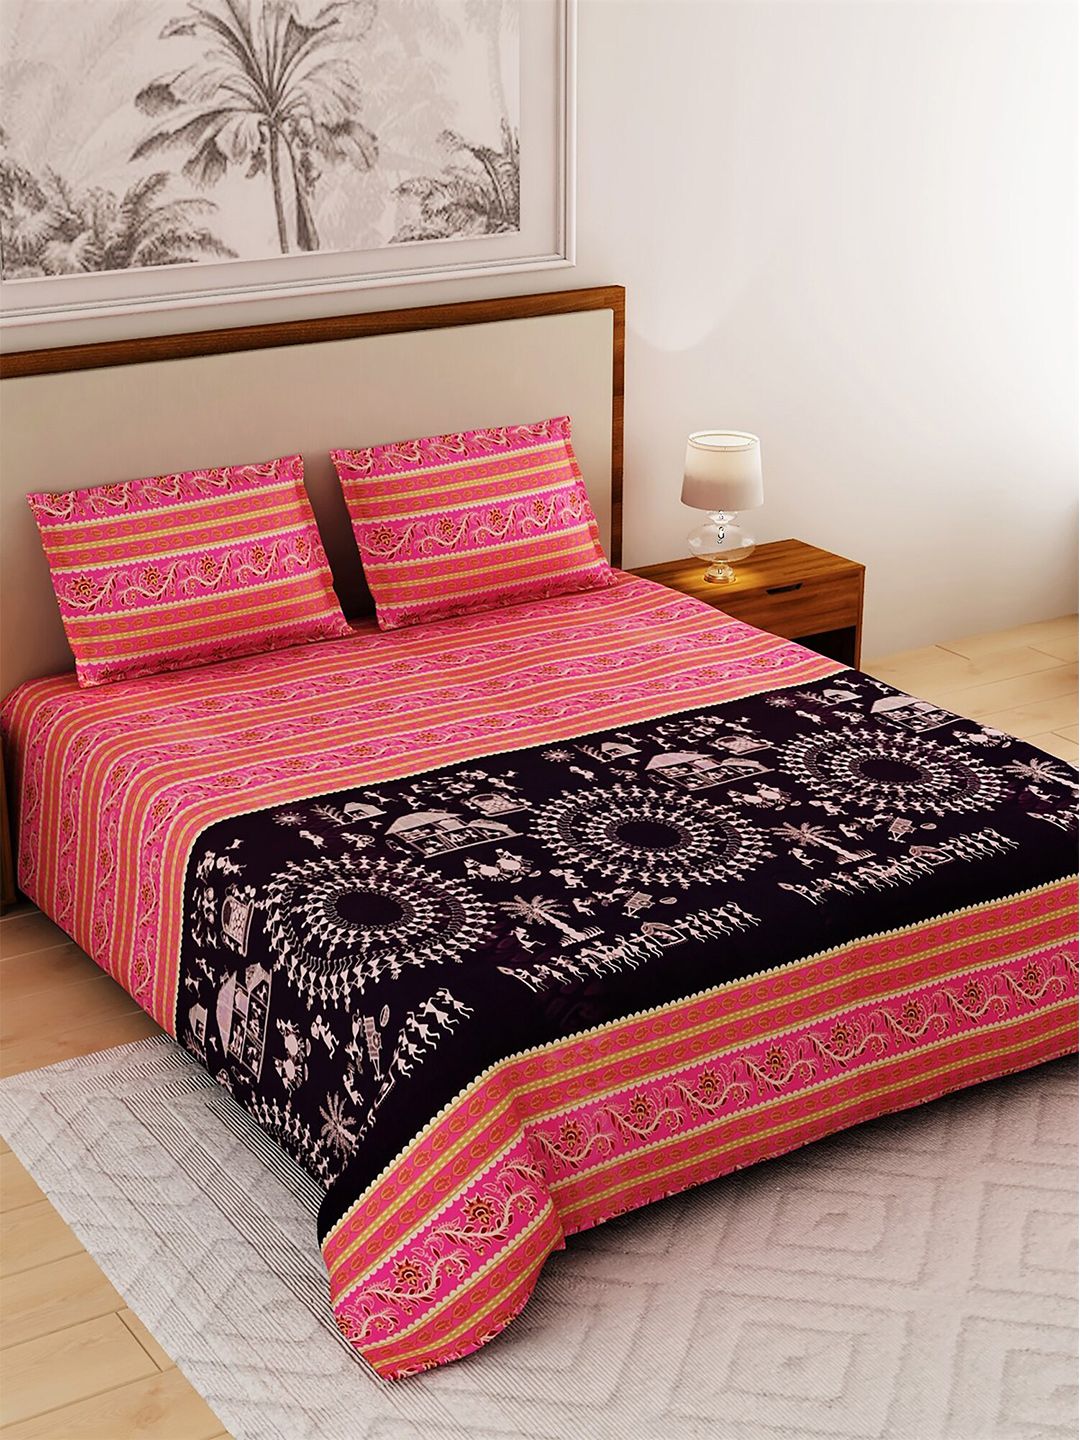 Salona Bichona Pink & Black Ethnic Motifs 120 TC King Bedsheet with 2 Pillow Covers Price in India